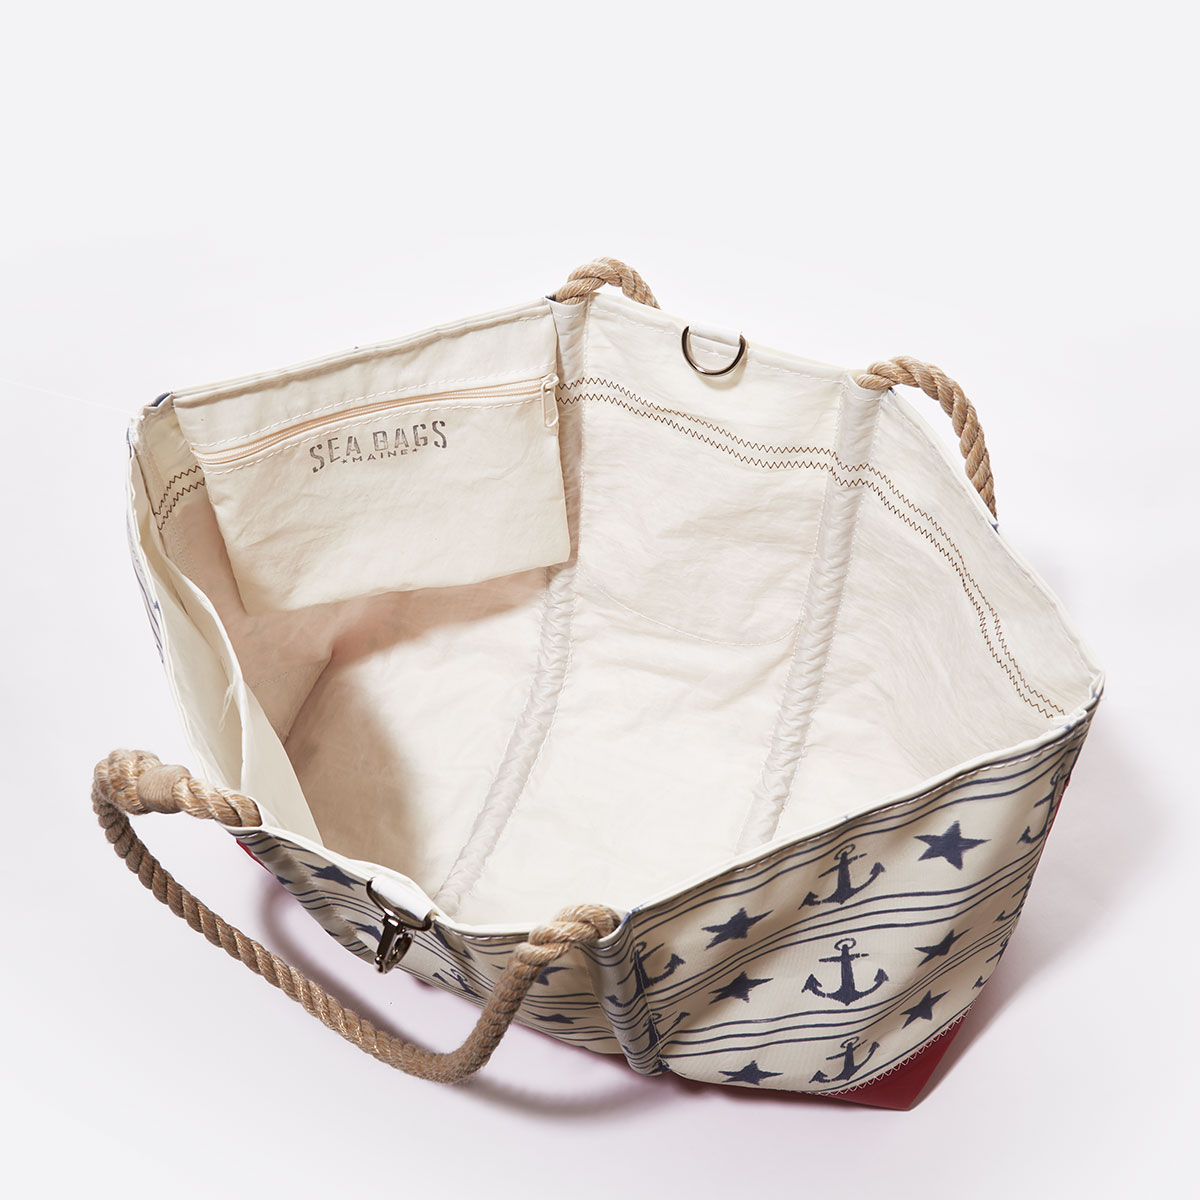 inside view, blue anchors stars and stripes line this recycled sail cloth tote with a red bottom and hemp rope handles